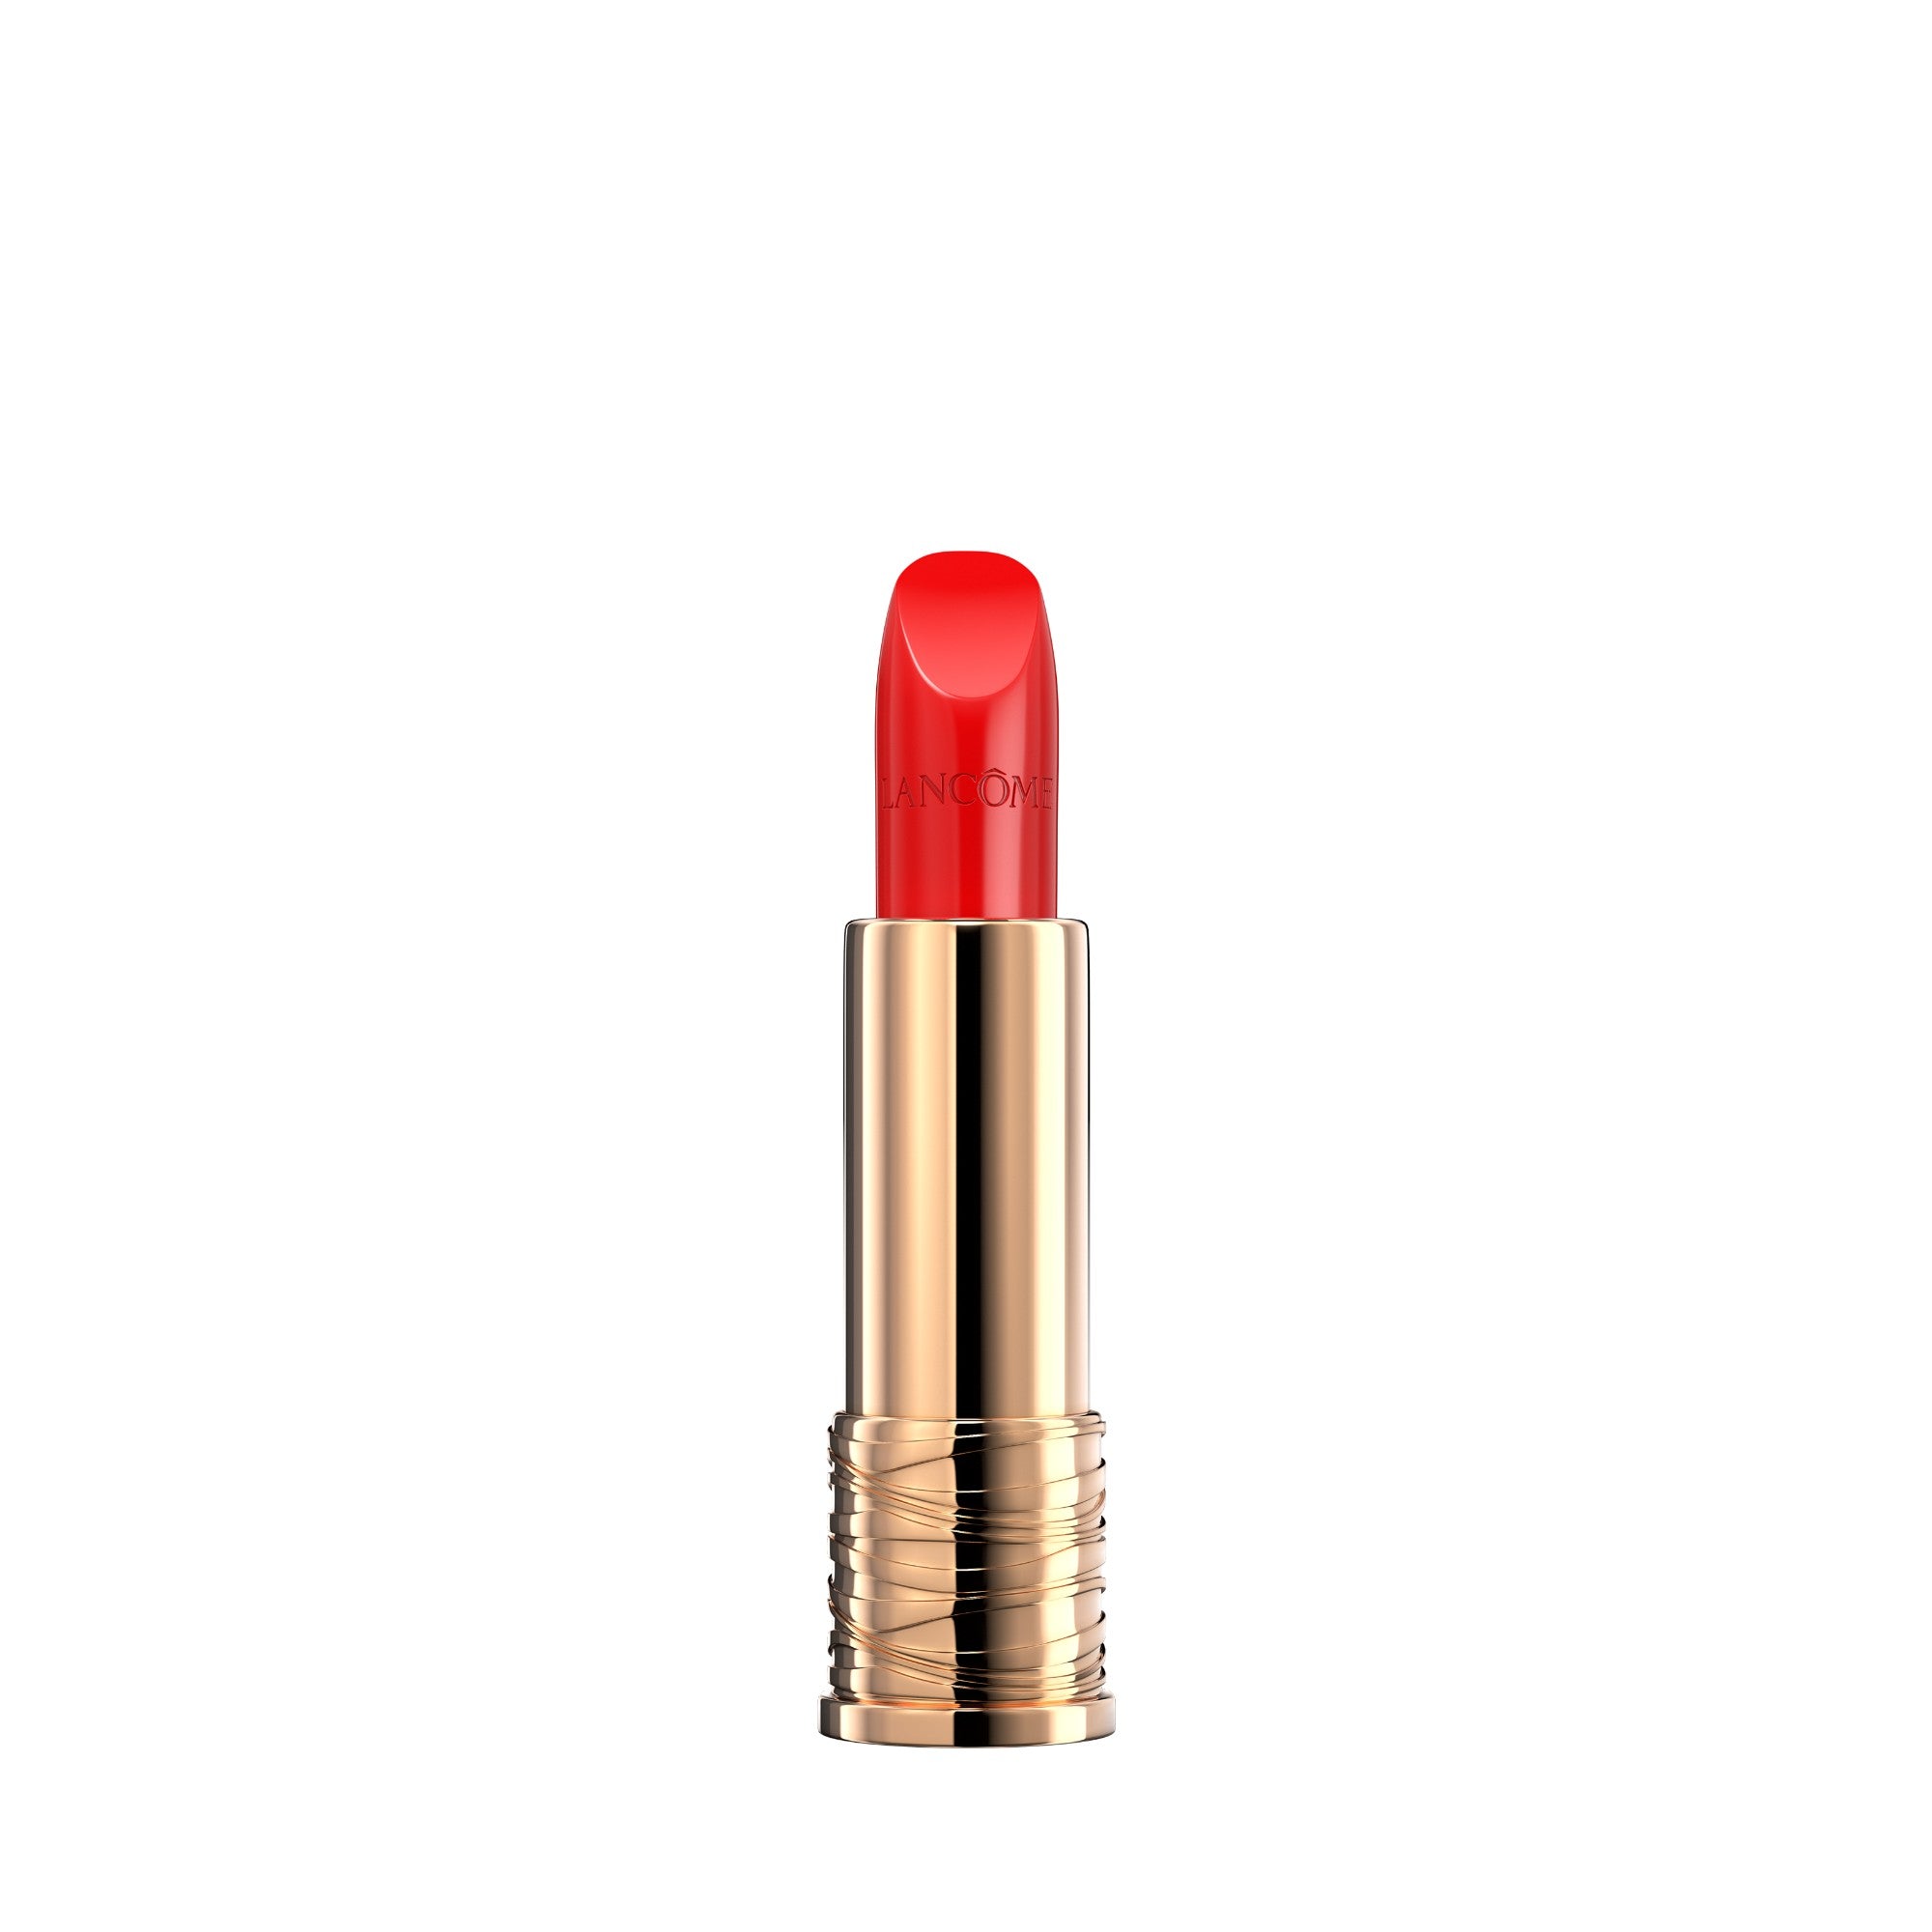 Lancome Absolu Rouge Cream Lipstick French Bisou Only